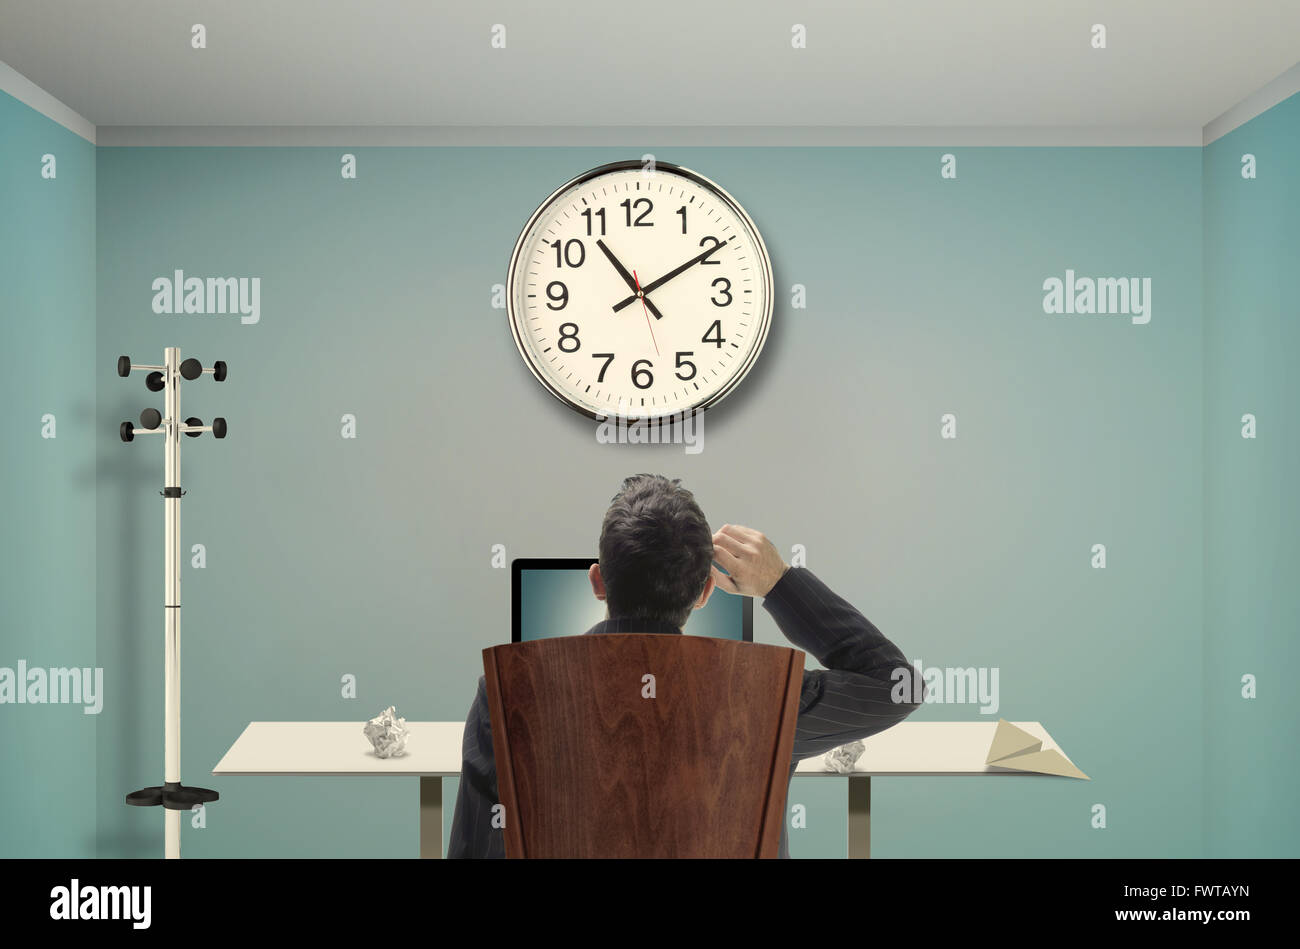 Relaxed businessman watching clocks Stock Photo